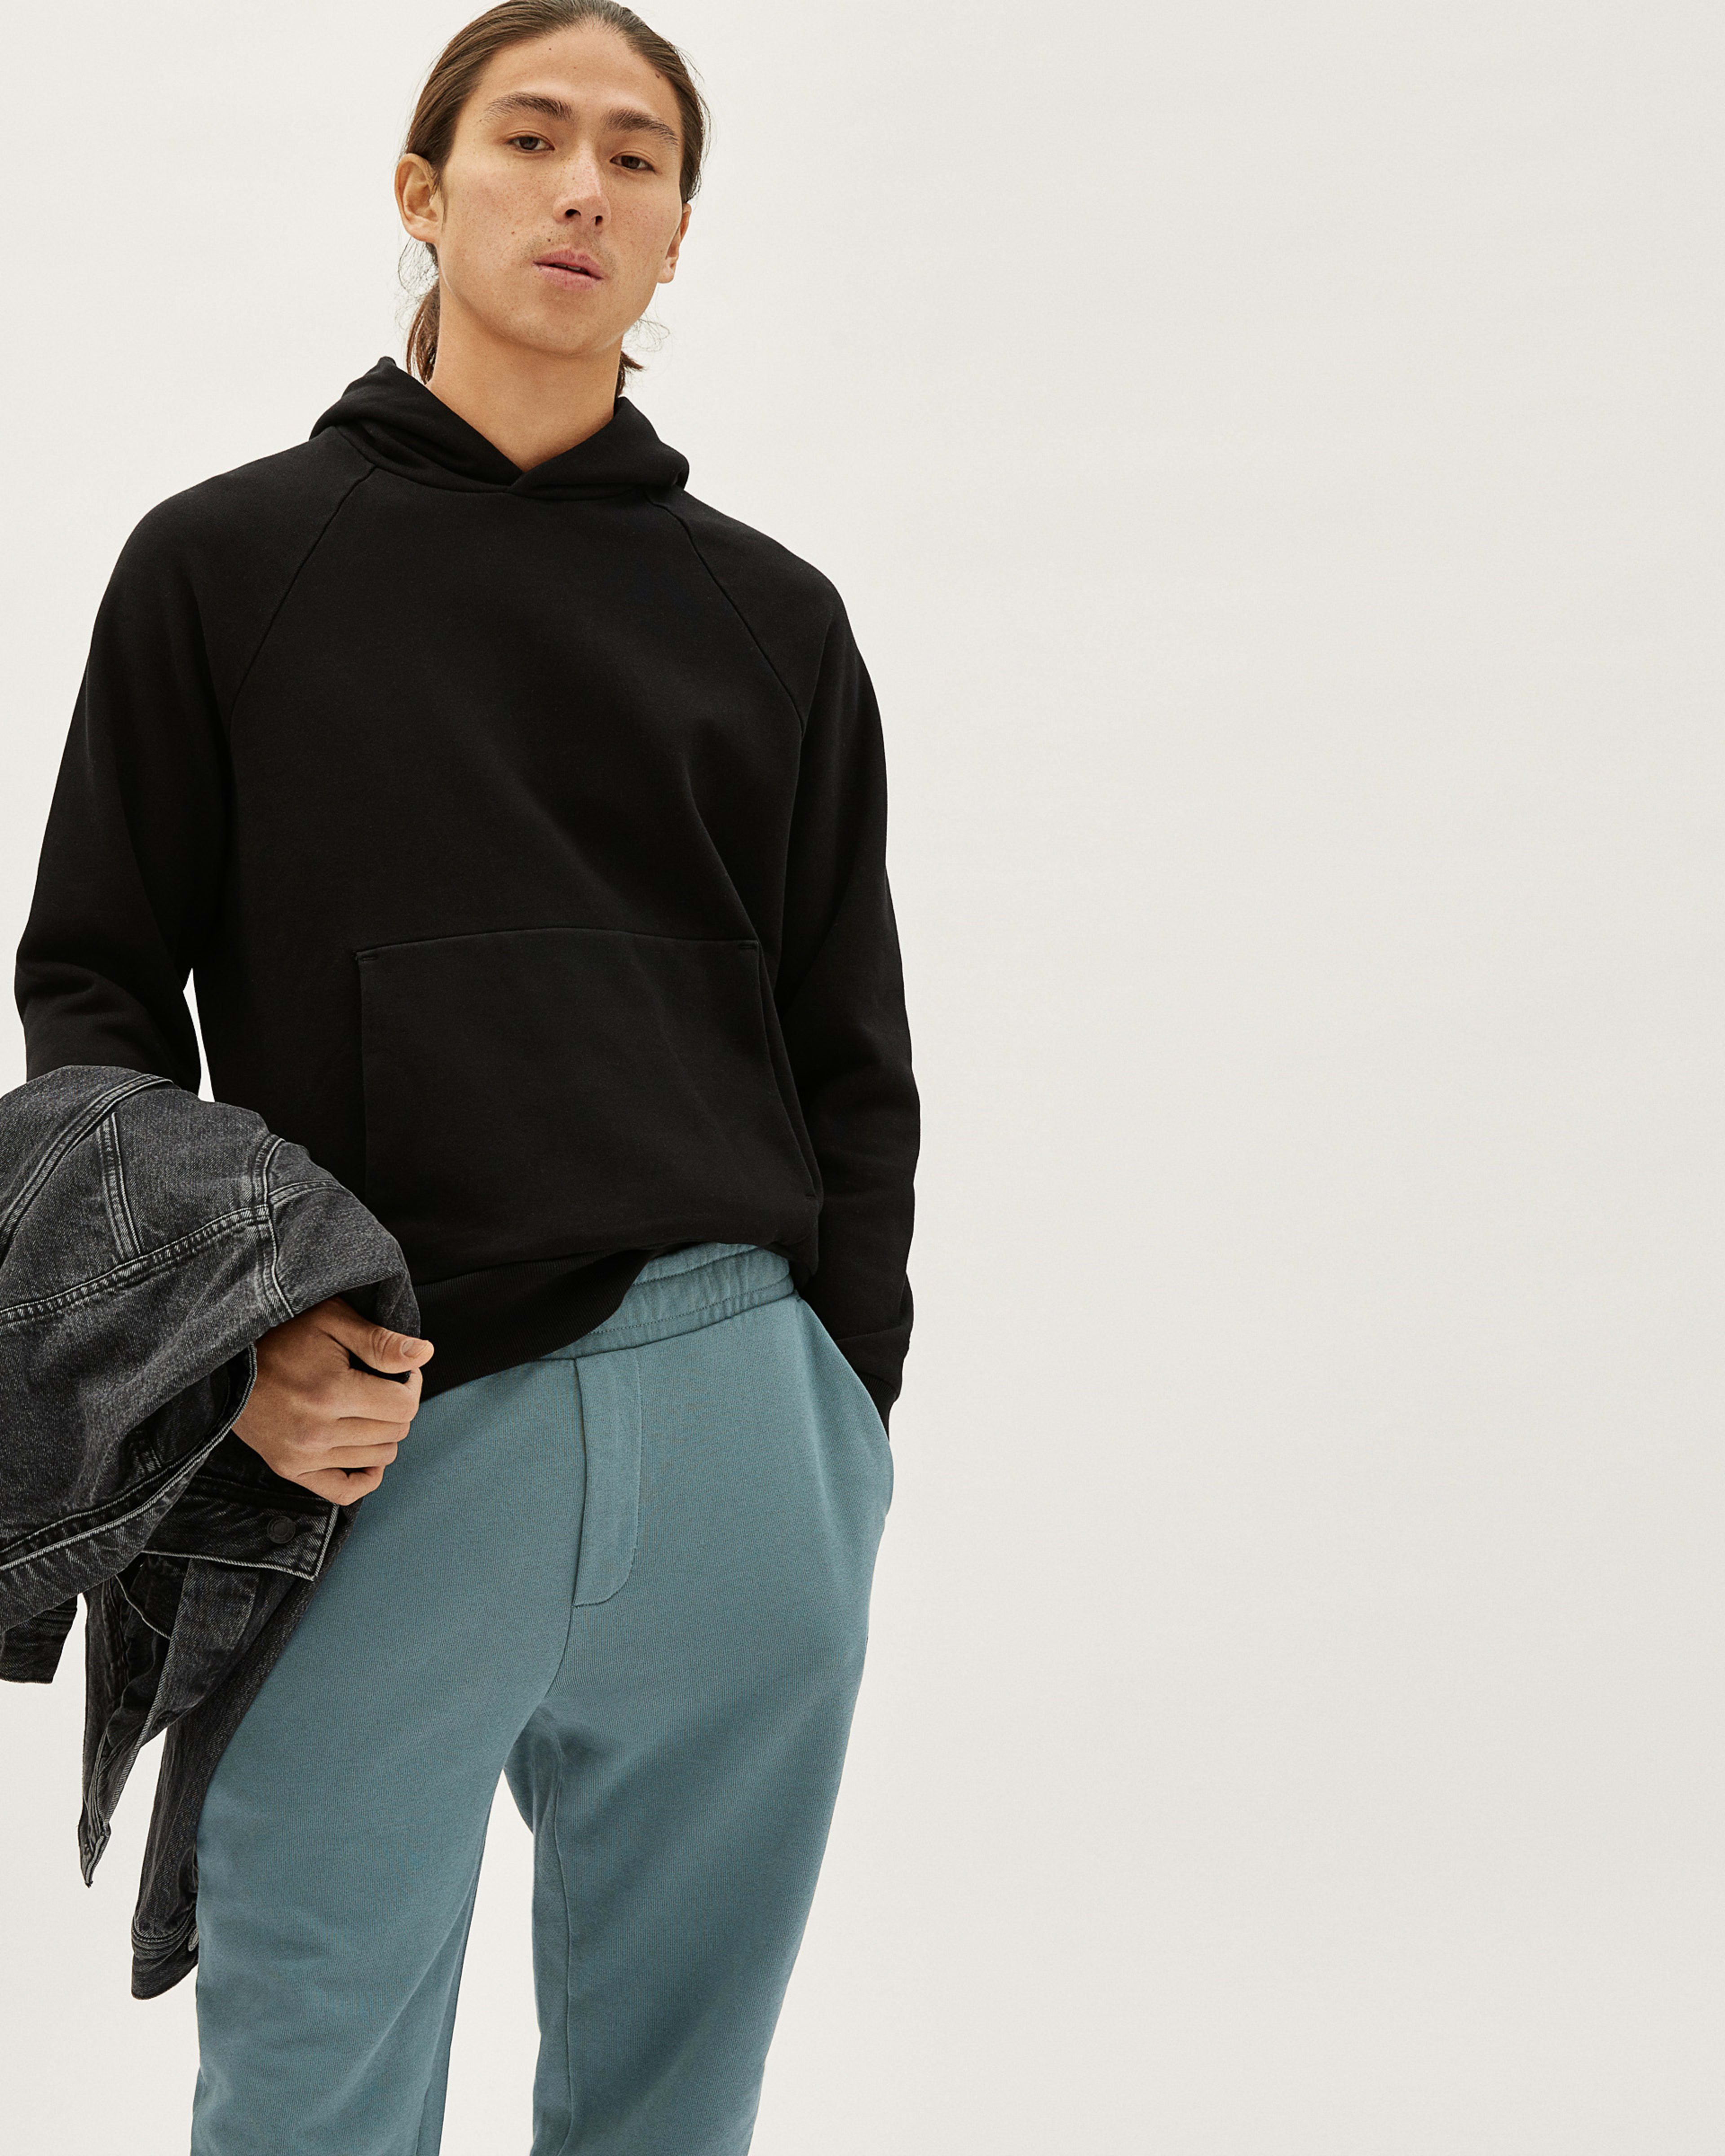 The Track Pant Green Balsam – Everlane